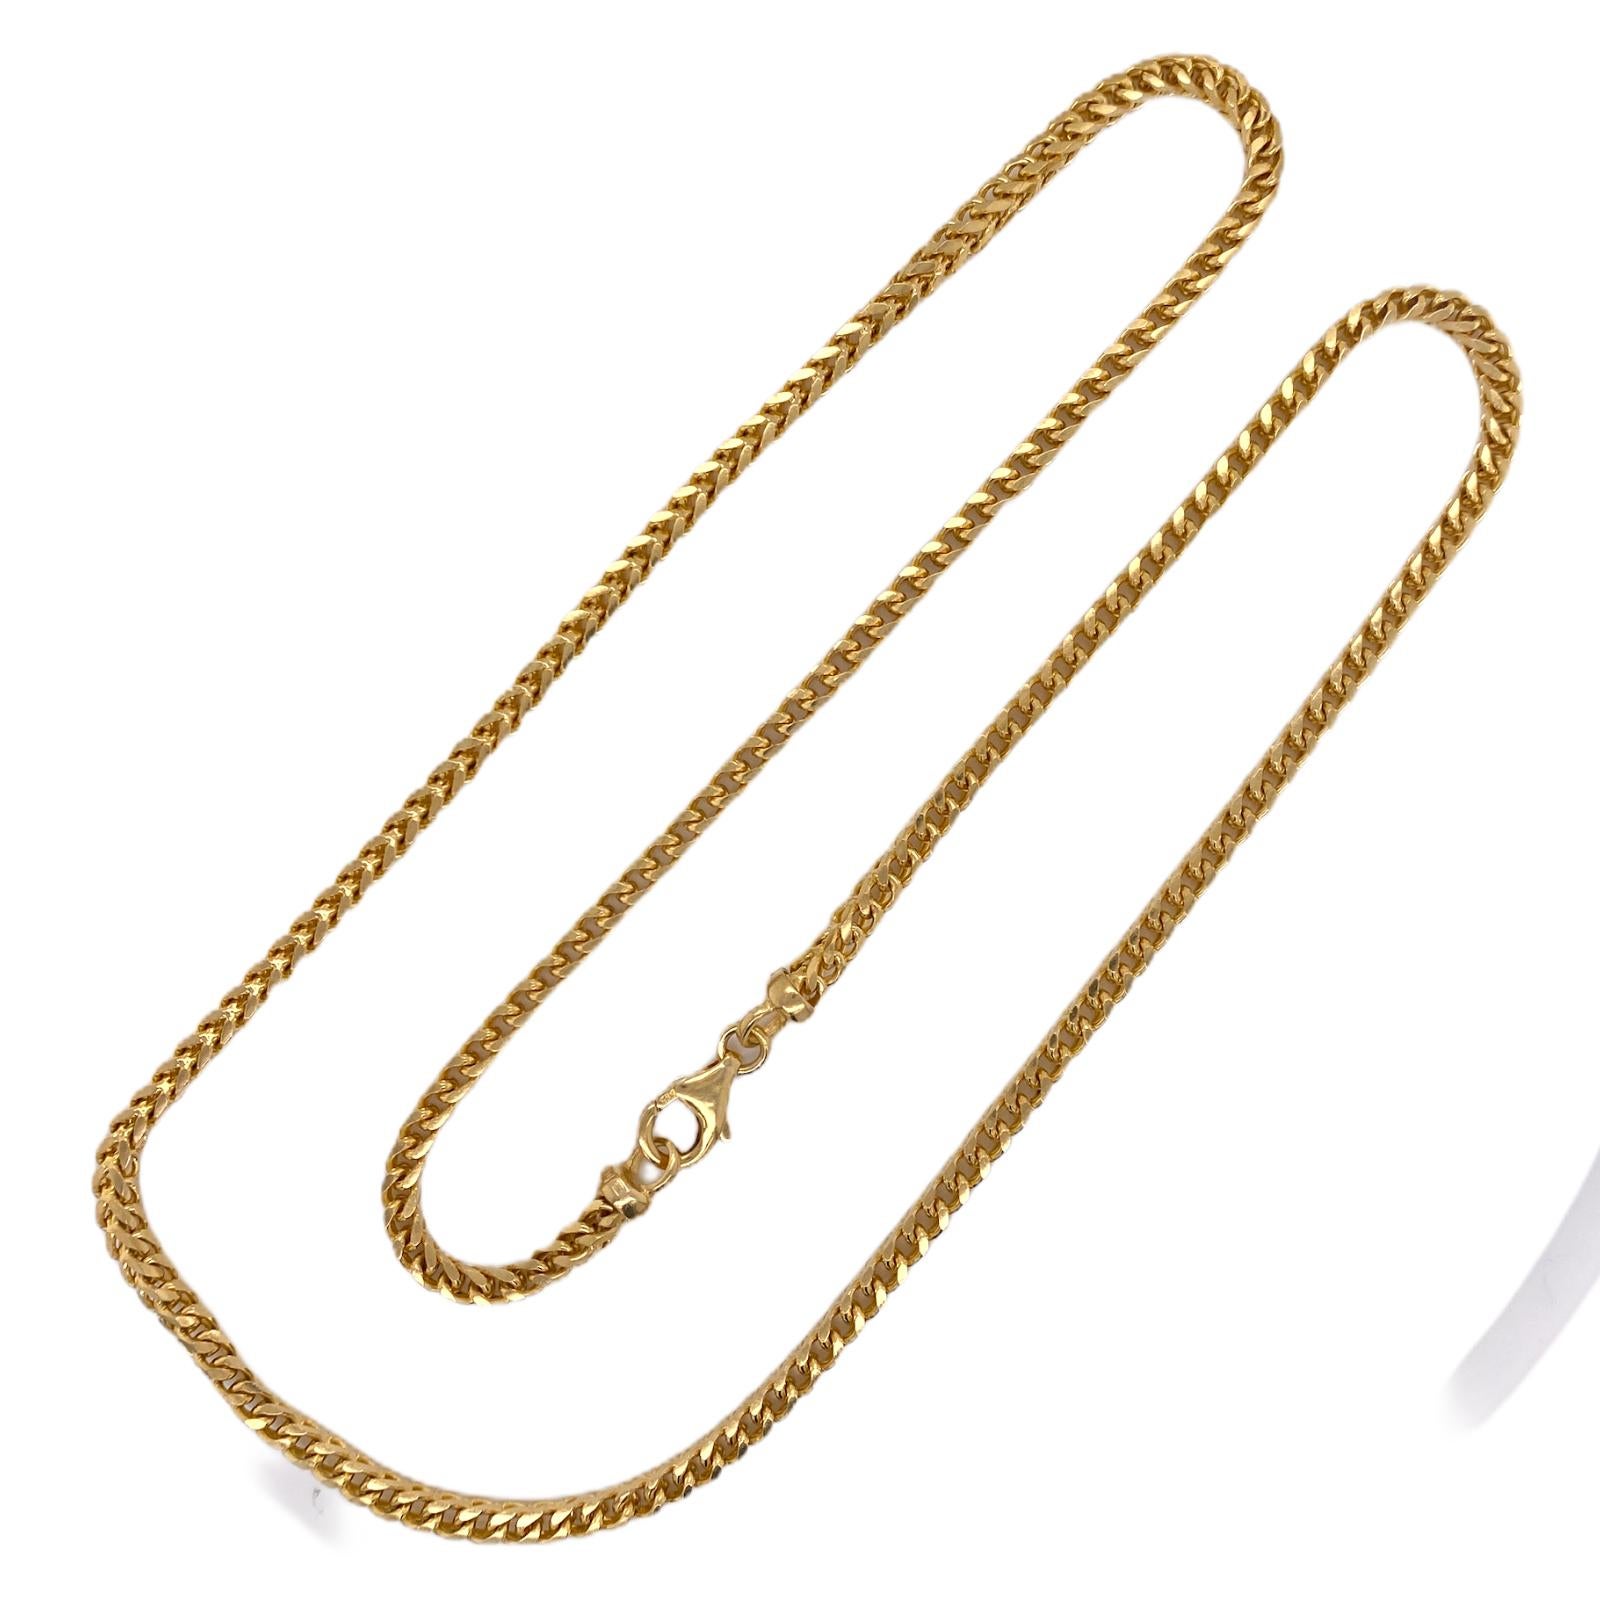 Italian square link men's chain fashioned in 14 karat yellow gold. The necklace measures 24 inches in length, and 3.5mm in width. 